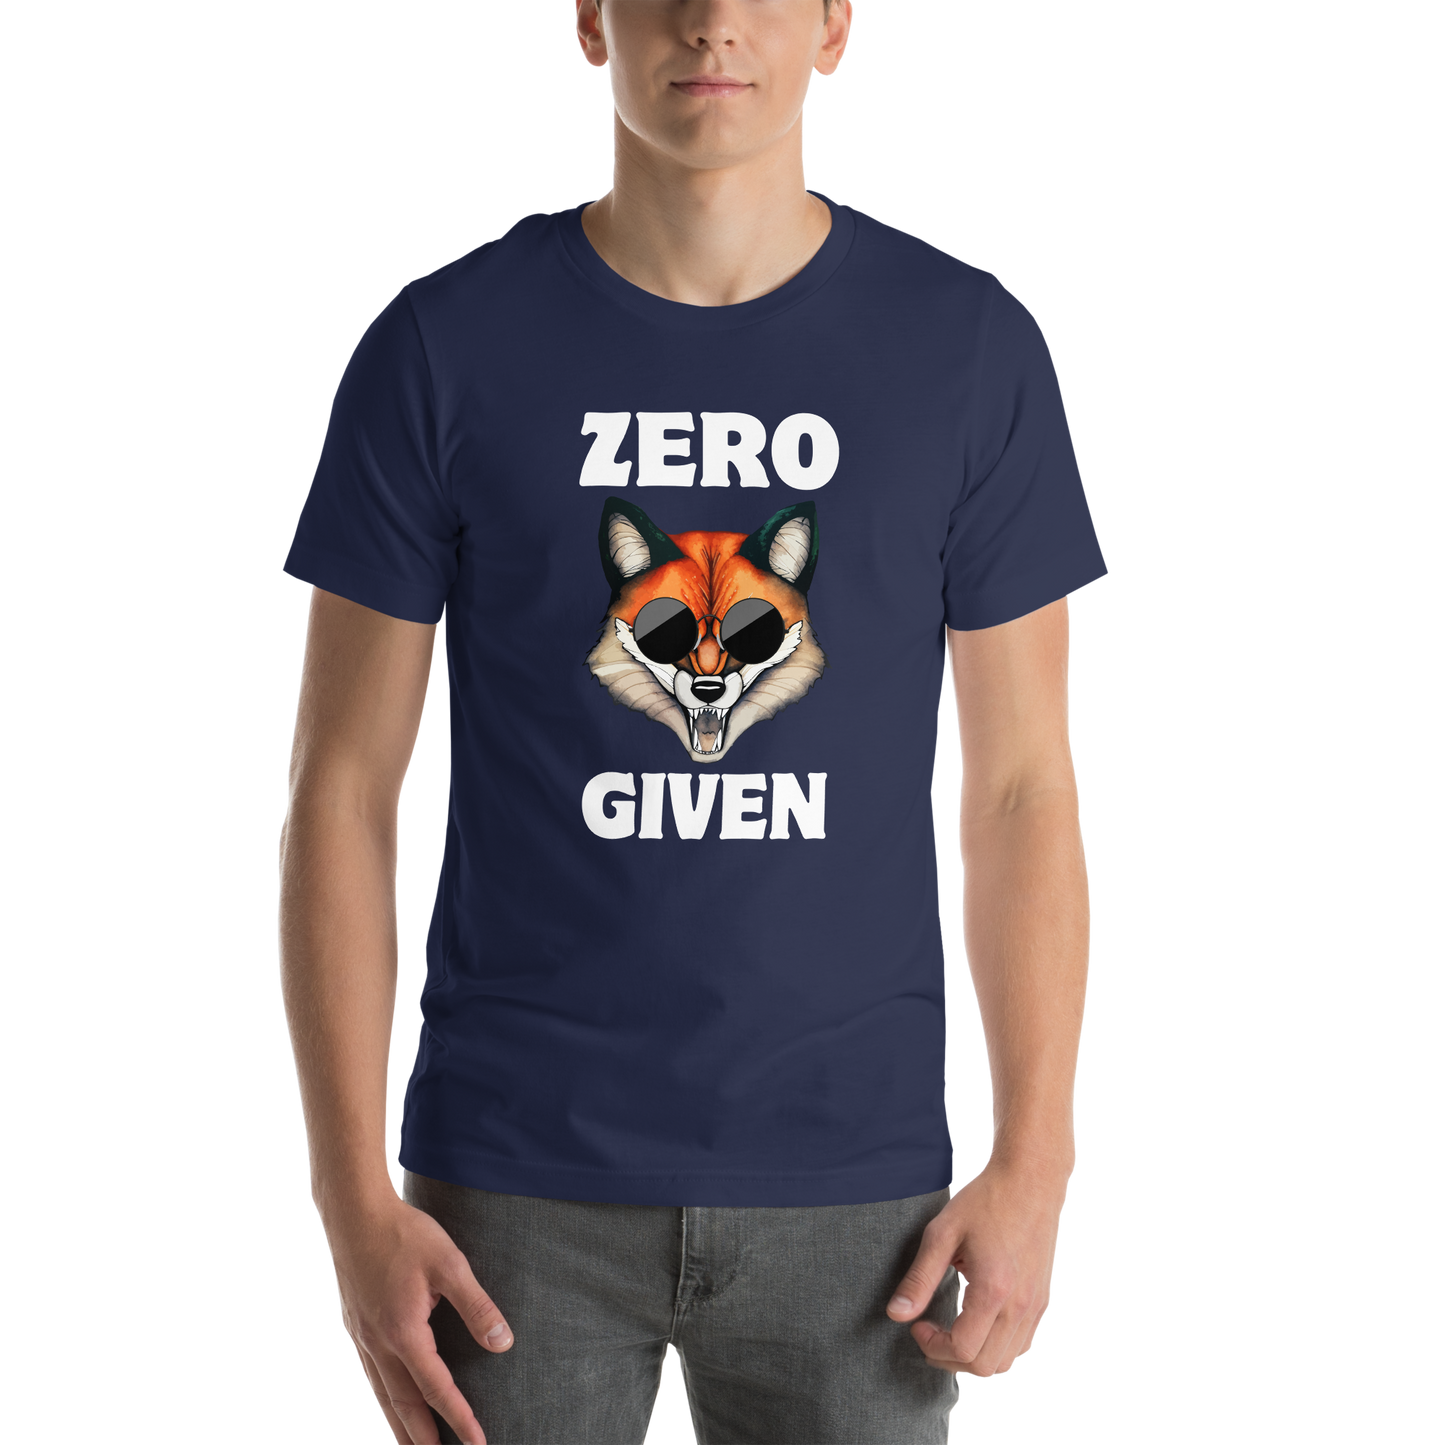 Man wearing a Navy Premium Fox Tee featuring a Zero Fox Given graphic on the chest - Funny Graphic Fox Tees - Boozy Fox